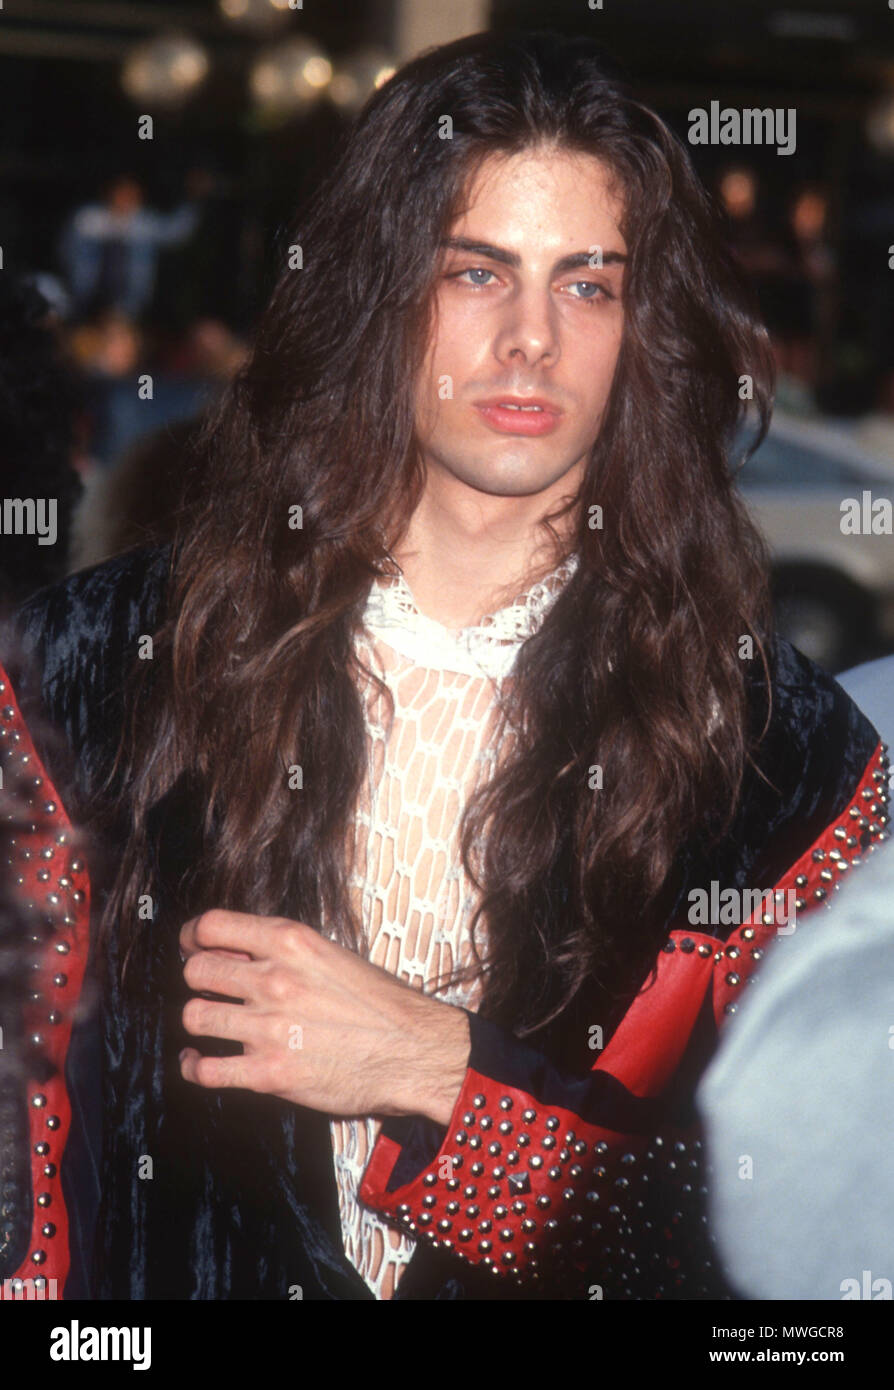 HOLLYWOOD, CA - JULY 11: Musician/singer Richie Kotzen attends the 'Bill & Ted's Bogus Journey' Hollywood Premiere on July 11, 1991 at Mann's Chinese Theatre in Hollywood, California. Photo by Barry King/Alamy Stock Photo Stock Photo